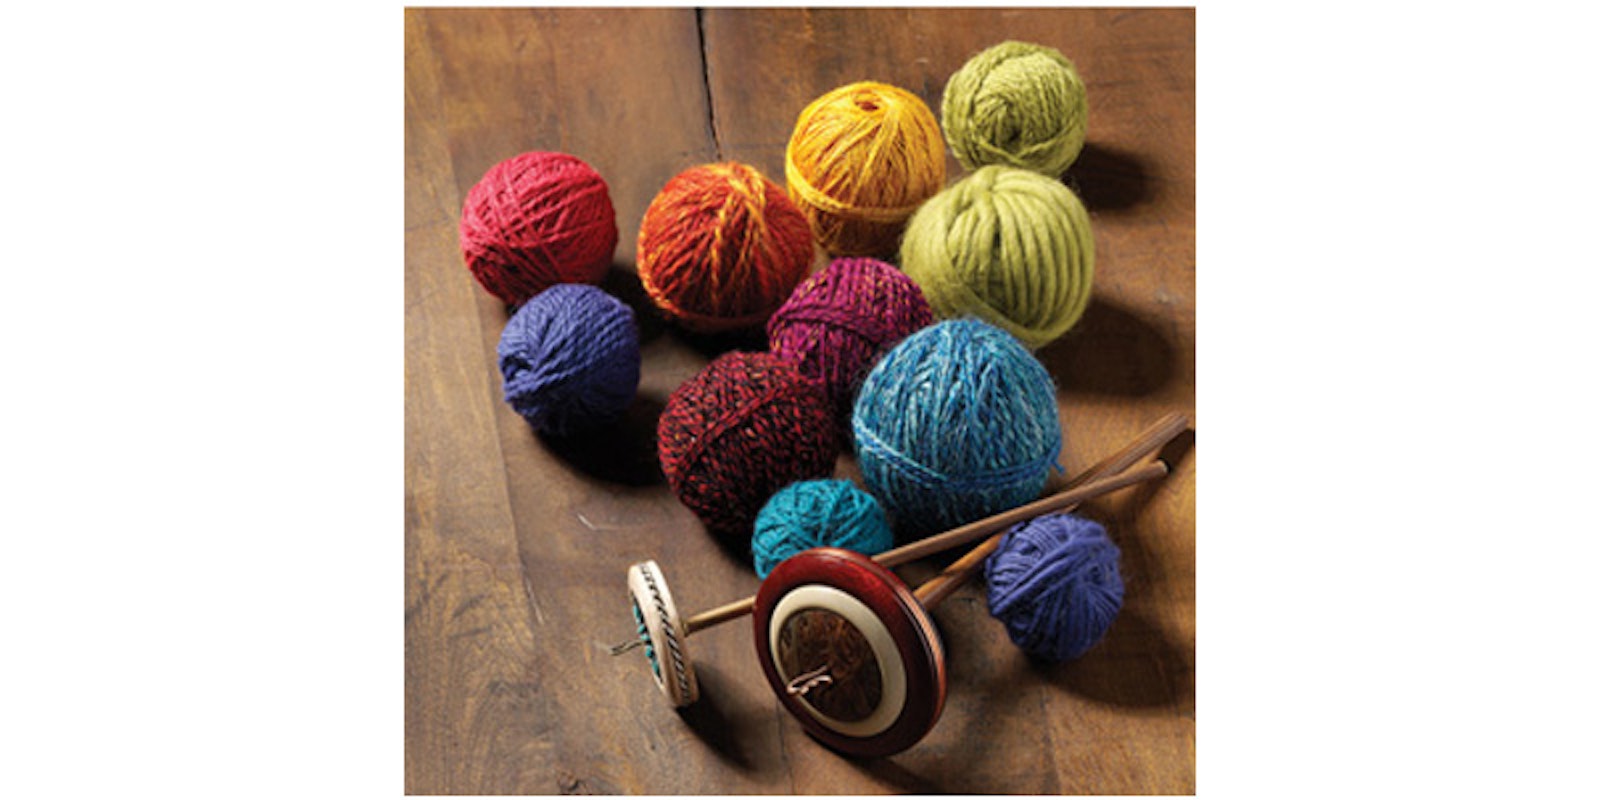 10 Reasons Why Spinning Yarn Is the BEST Craft